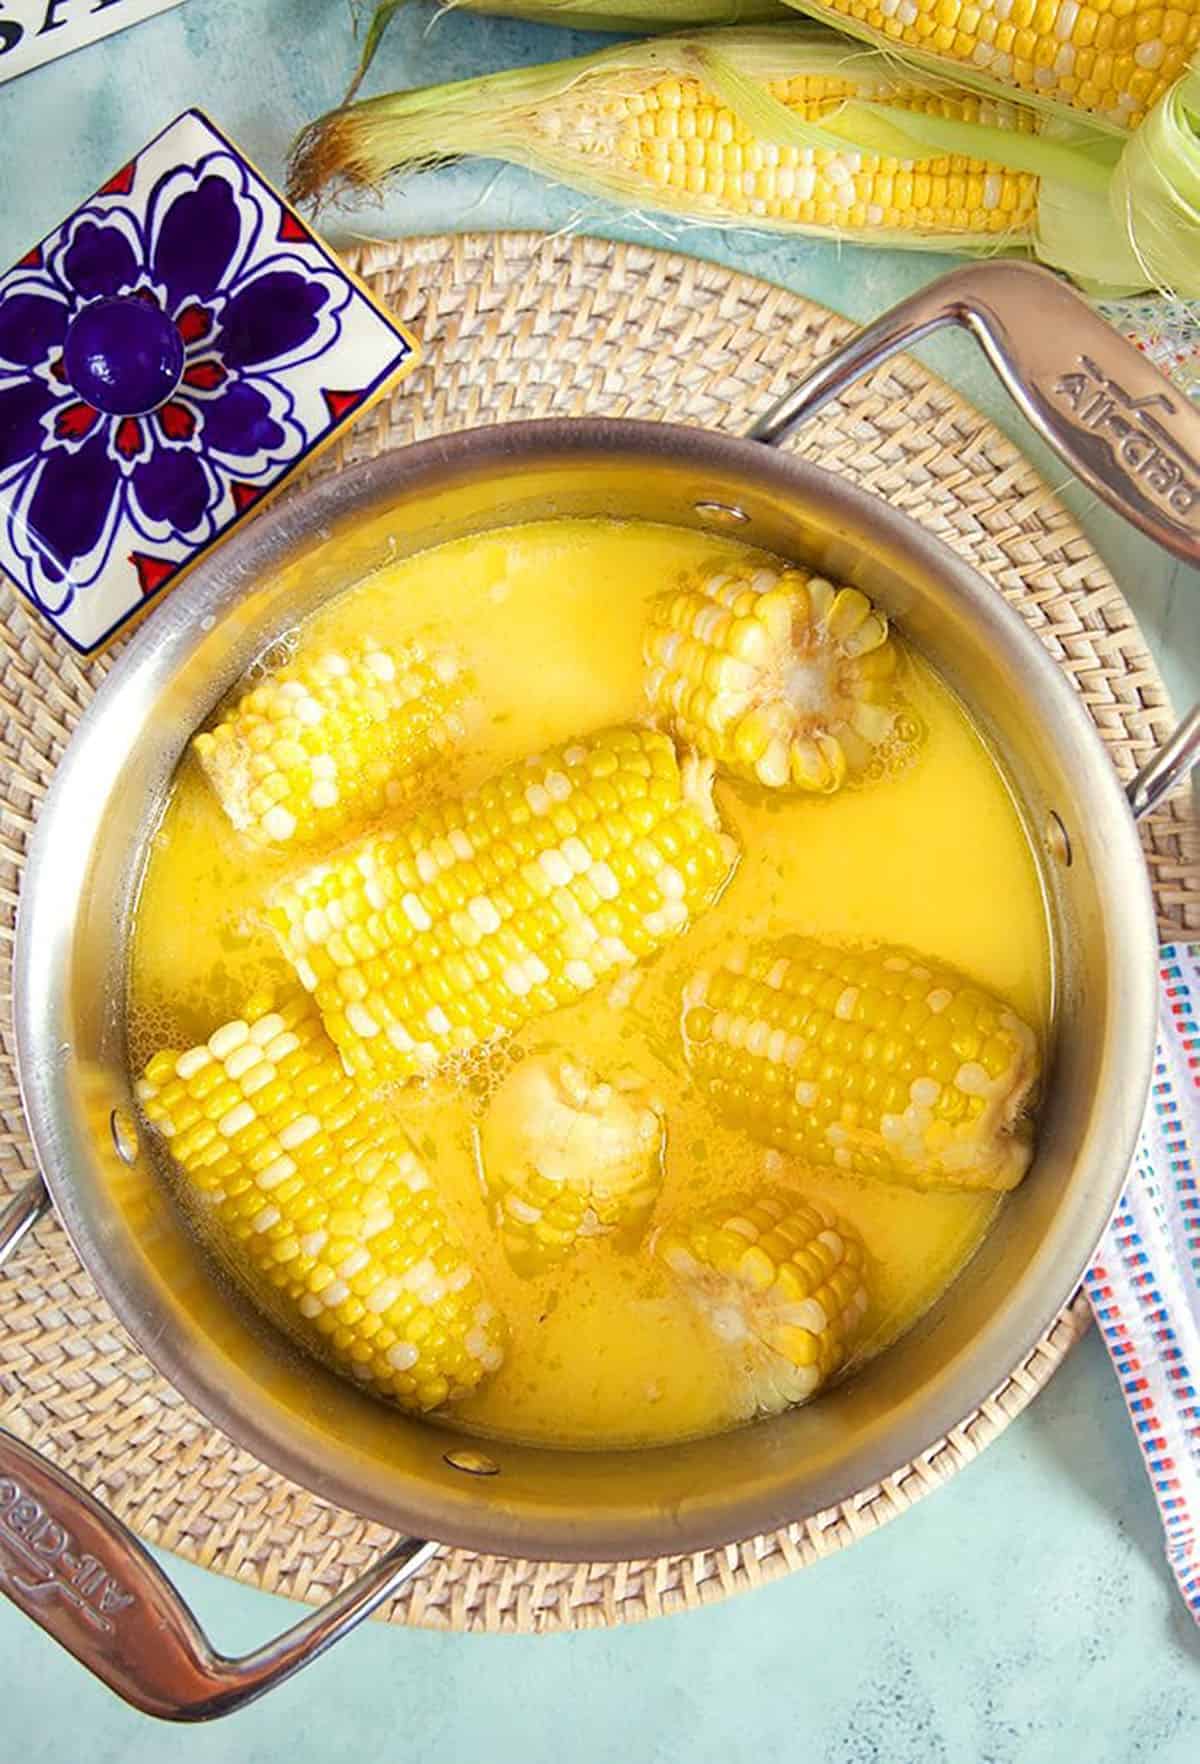 corn on the cob in a stainless steel pot.